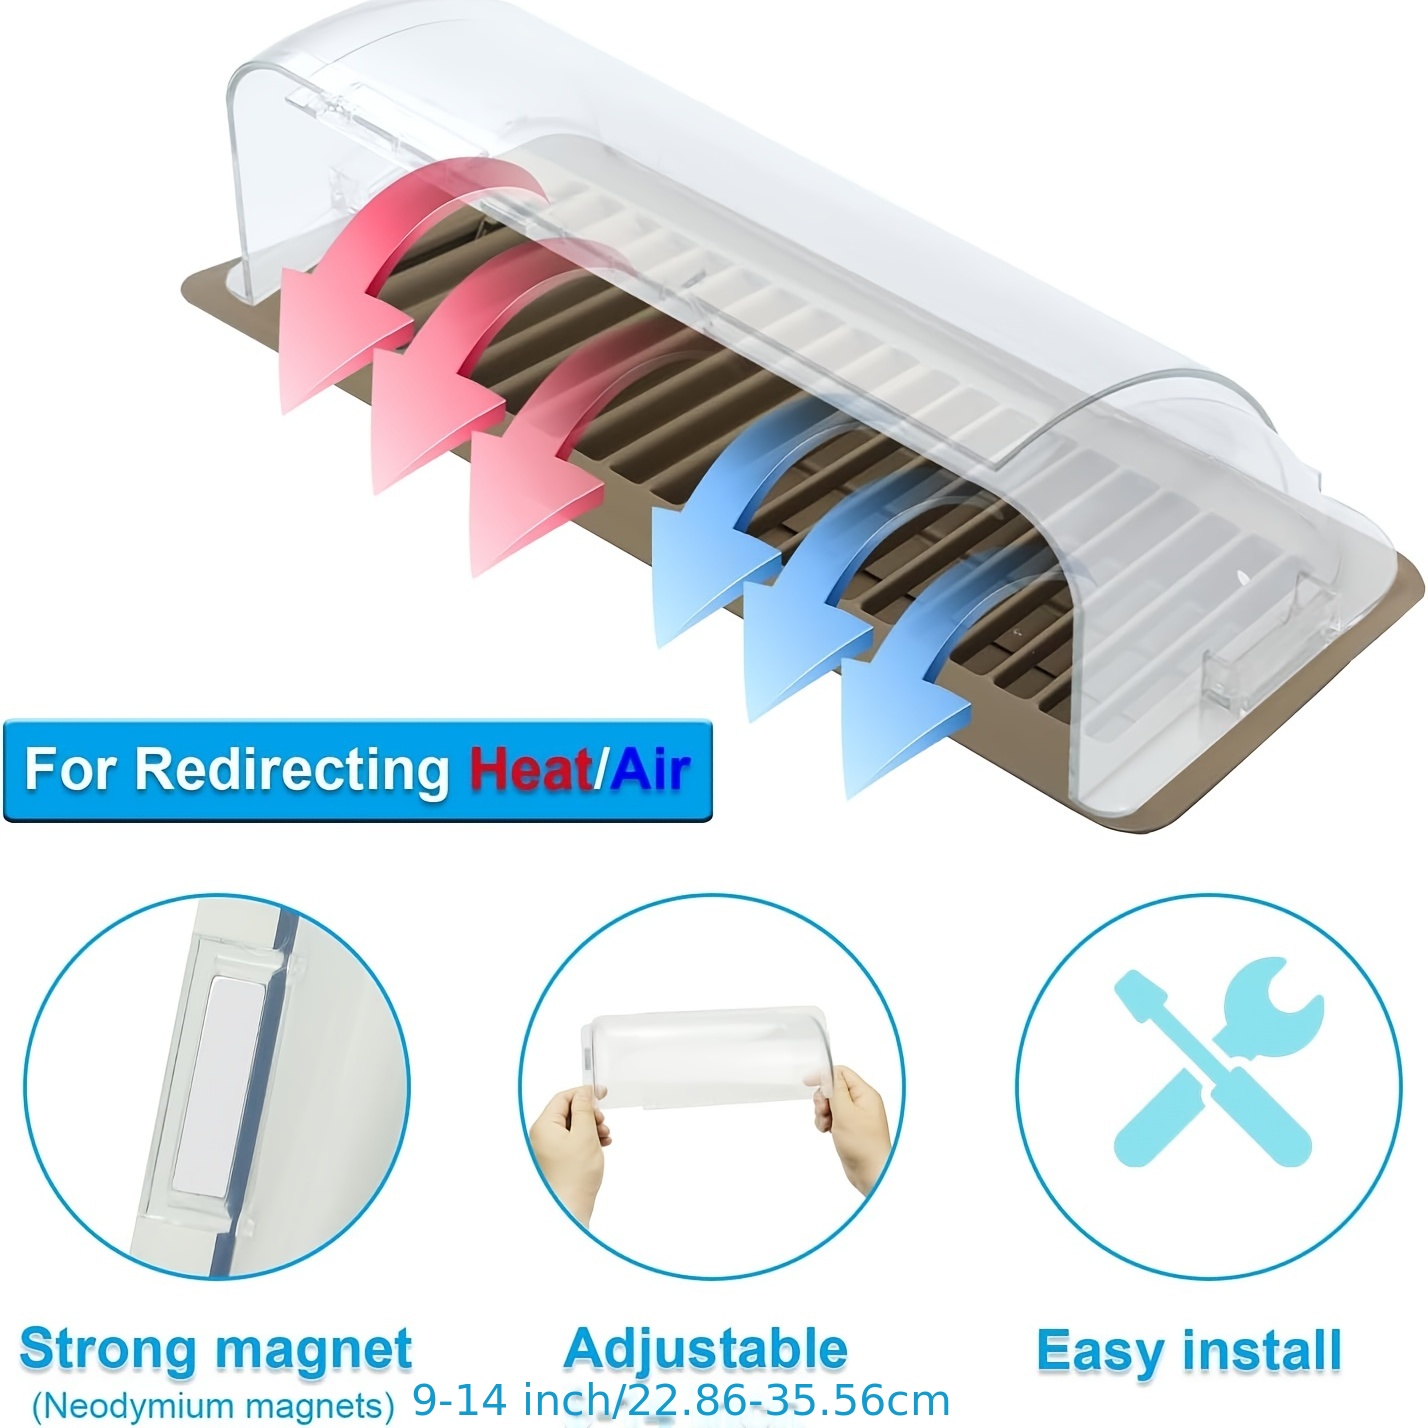  Air Vent Deflectors Adjustable Magnetic Heat and Vent Cover,9  to 15Inches-Heavy Duty Unbreakable Plastic with Magnet Secure Design ，for  Vent Covers for Home Floor，Sidewal，Ceiling Registers,2 Pack… : Appliances